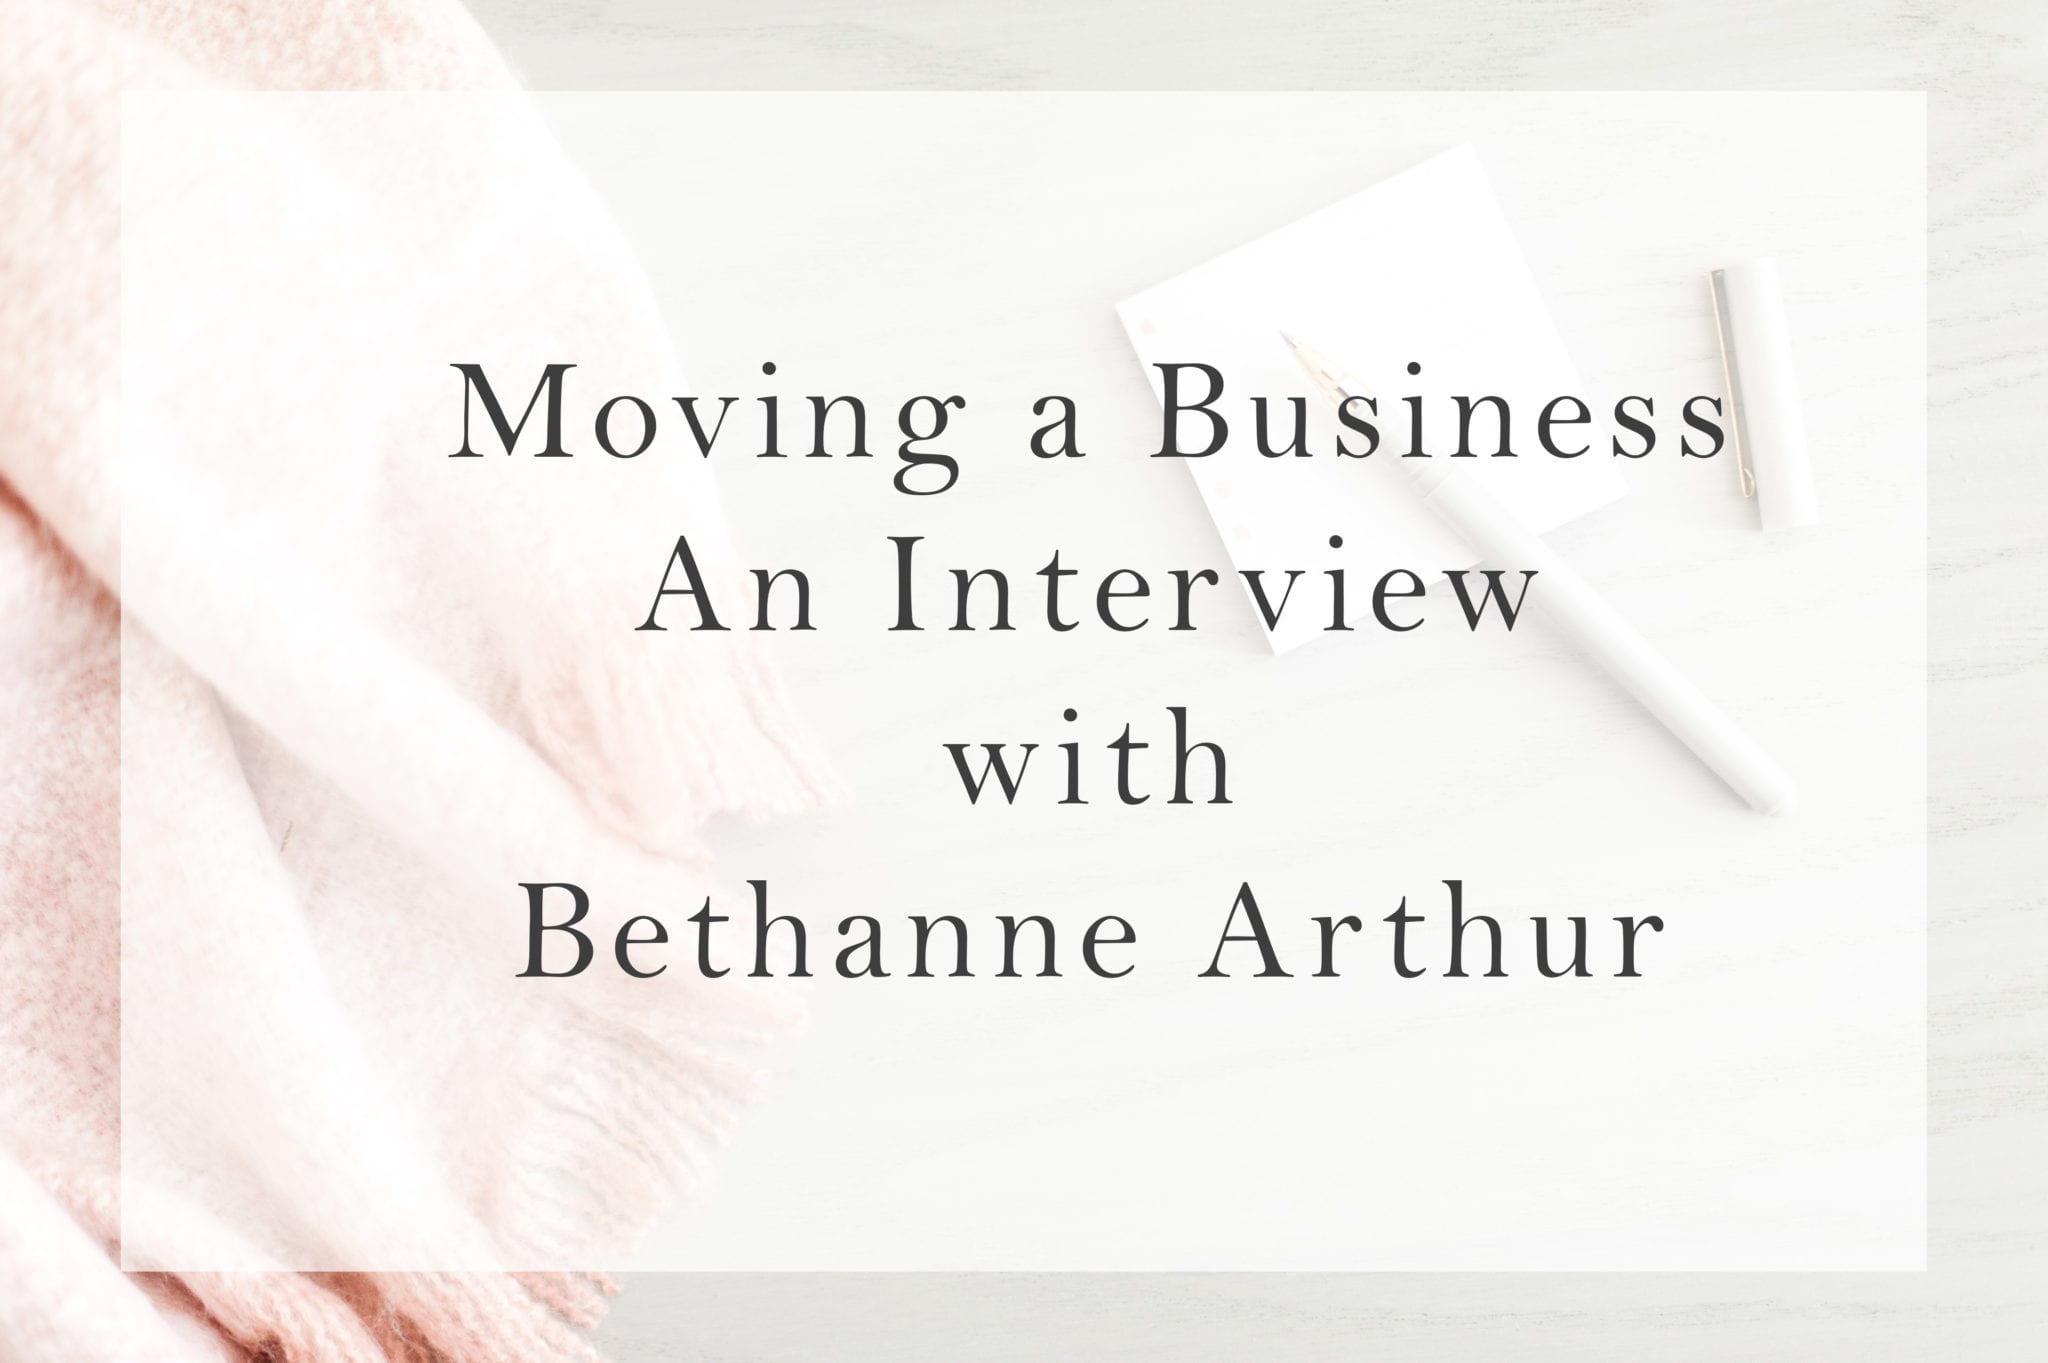 Interview with Bethanne Arthur on moving a business